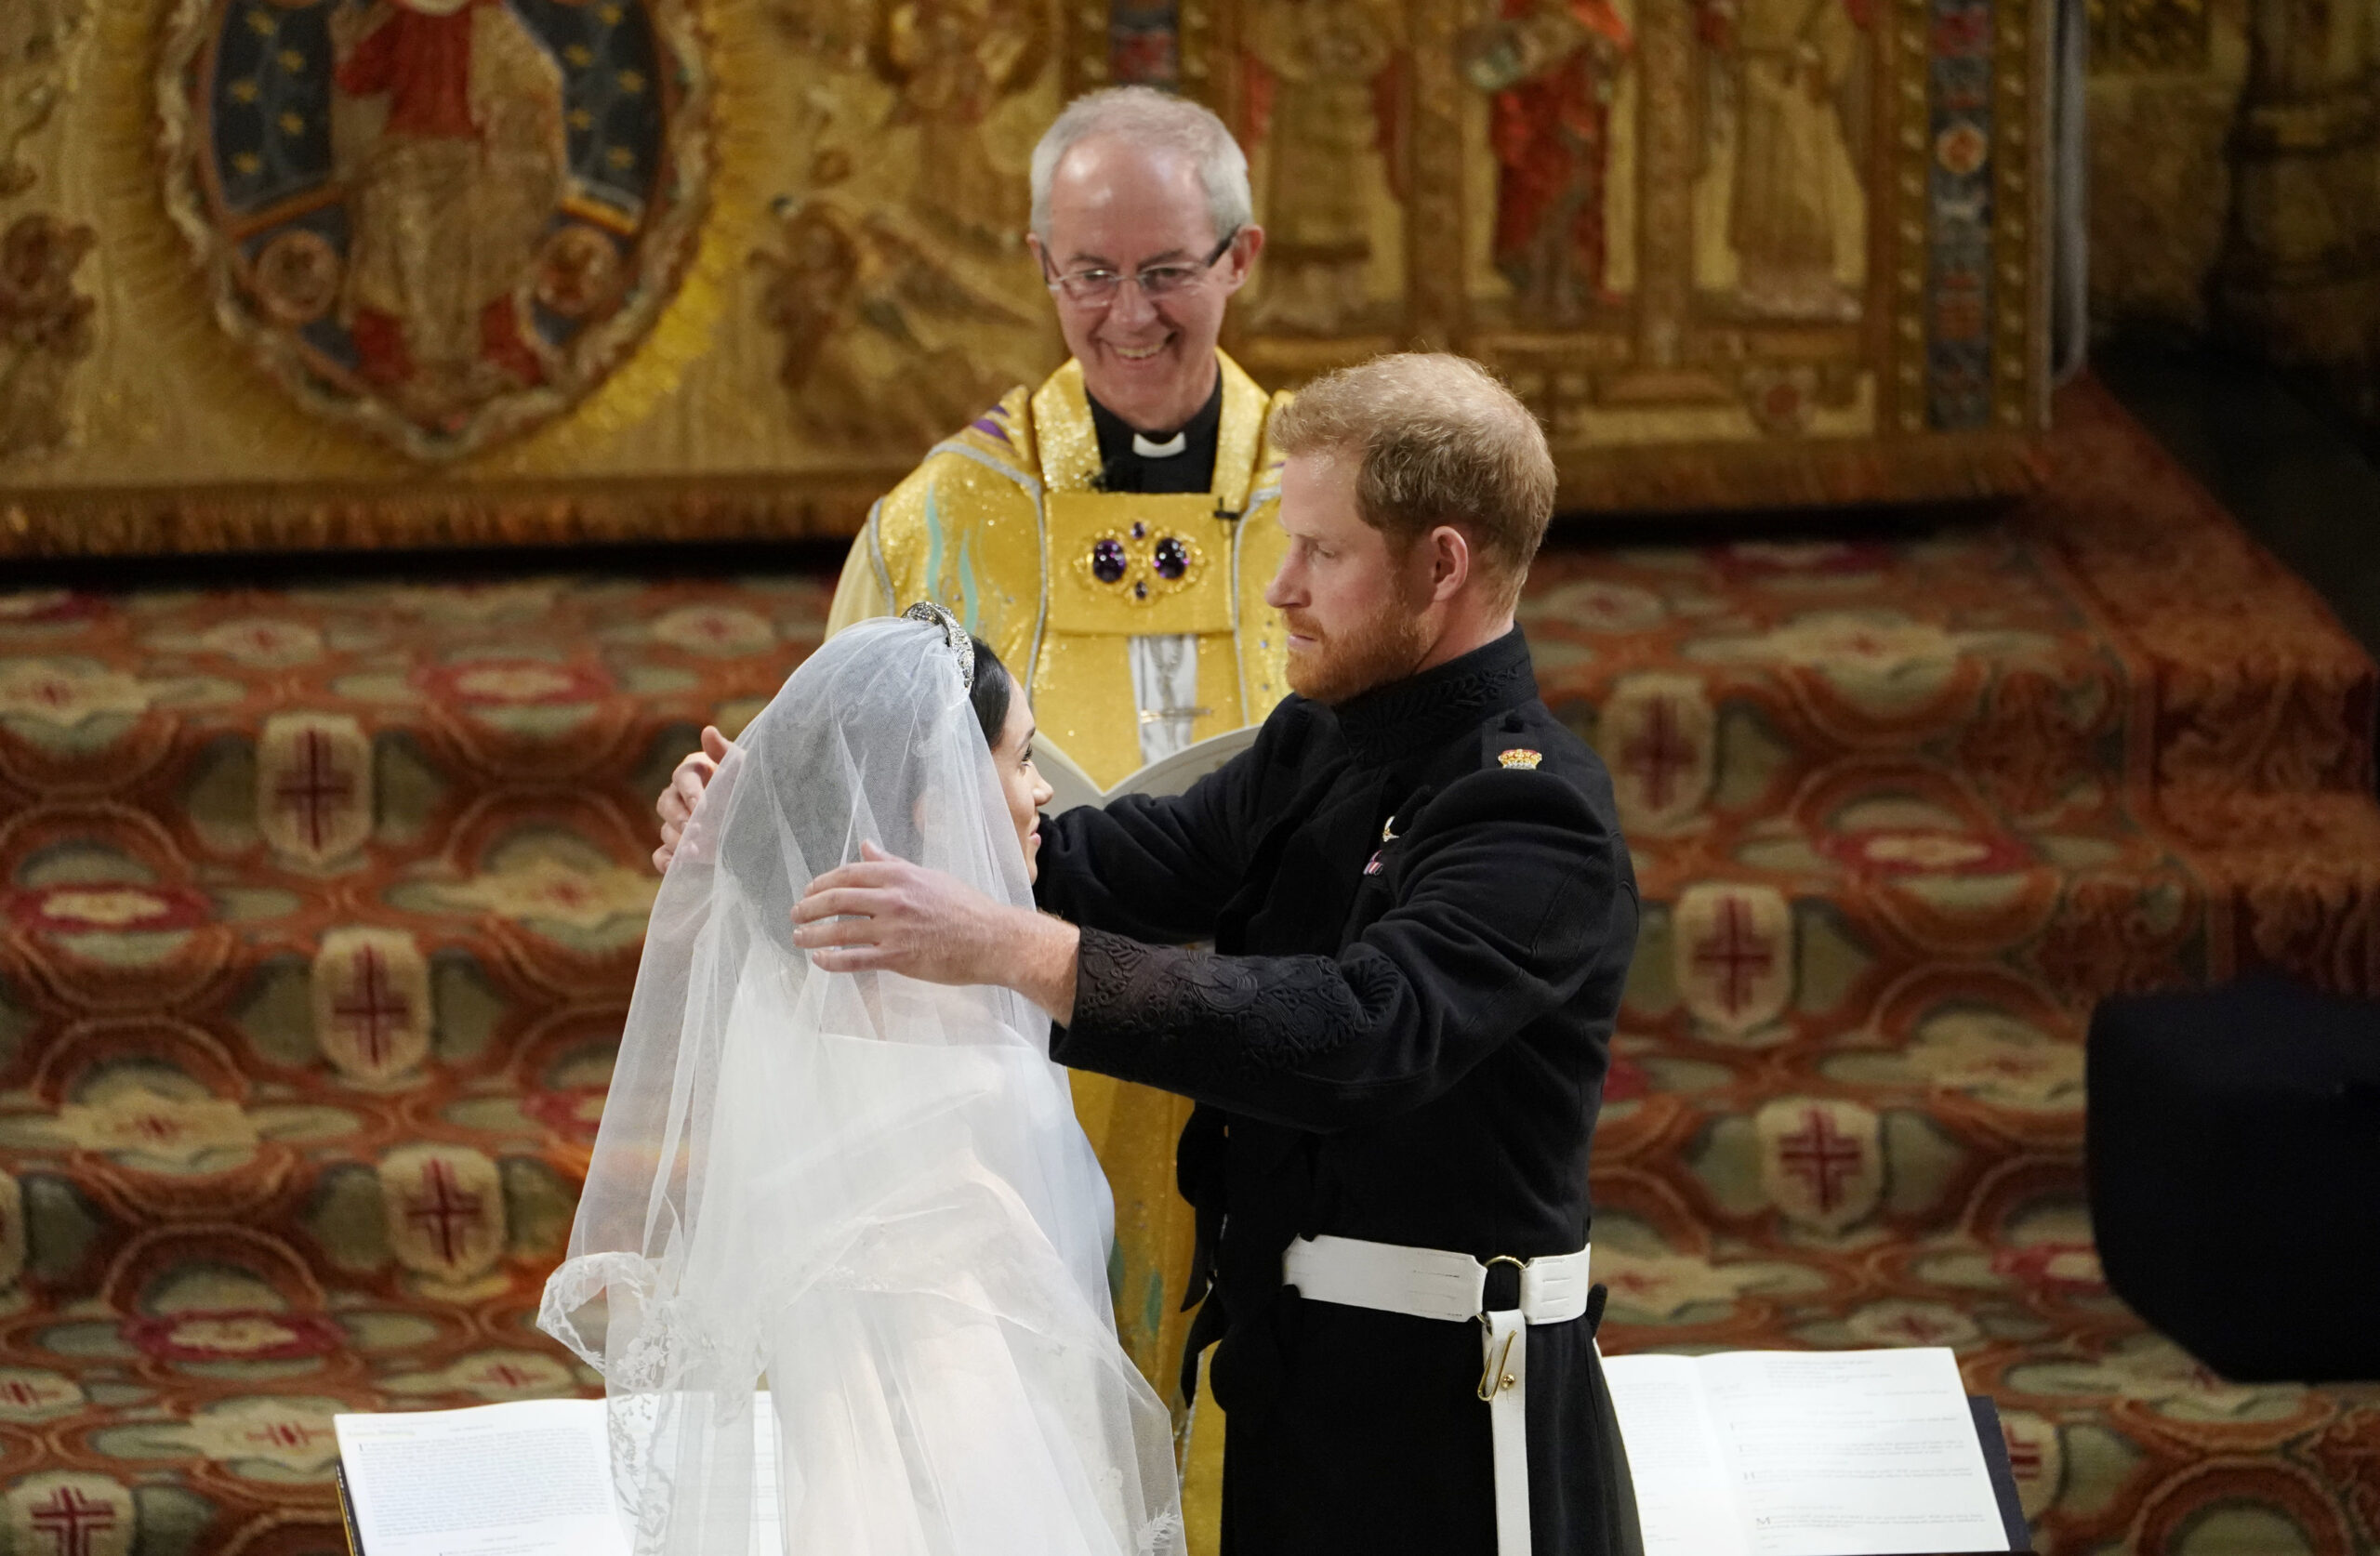 FILE - In this Saturday, May 19, 2018 file photo, Britain's Prince Harry pulls back the veil of Meghan Markle watched by Archbishop of Canterbury Justin Welby during their wedding at St. George's Chapel in Windsor Castle in Windsor, near London, England. The archbishop of Canterbury has confirmed that he married Prince Harry and Meghan Markle at Windsor Castle in May 2018, despite the couple’s claim they had another, private, ceremony three days earlier. During an interview with Oprah Winfrey earlier this month, Meghan said that “three days before our wedding we got married.” (Owen Humphreys/pool photo via AP, File)